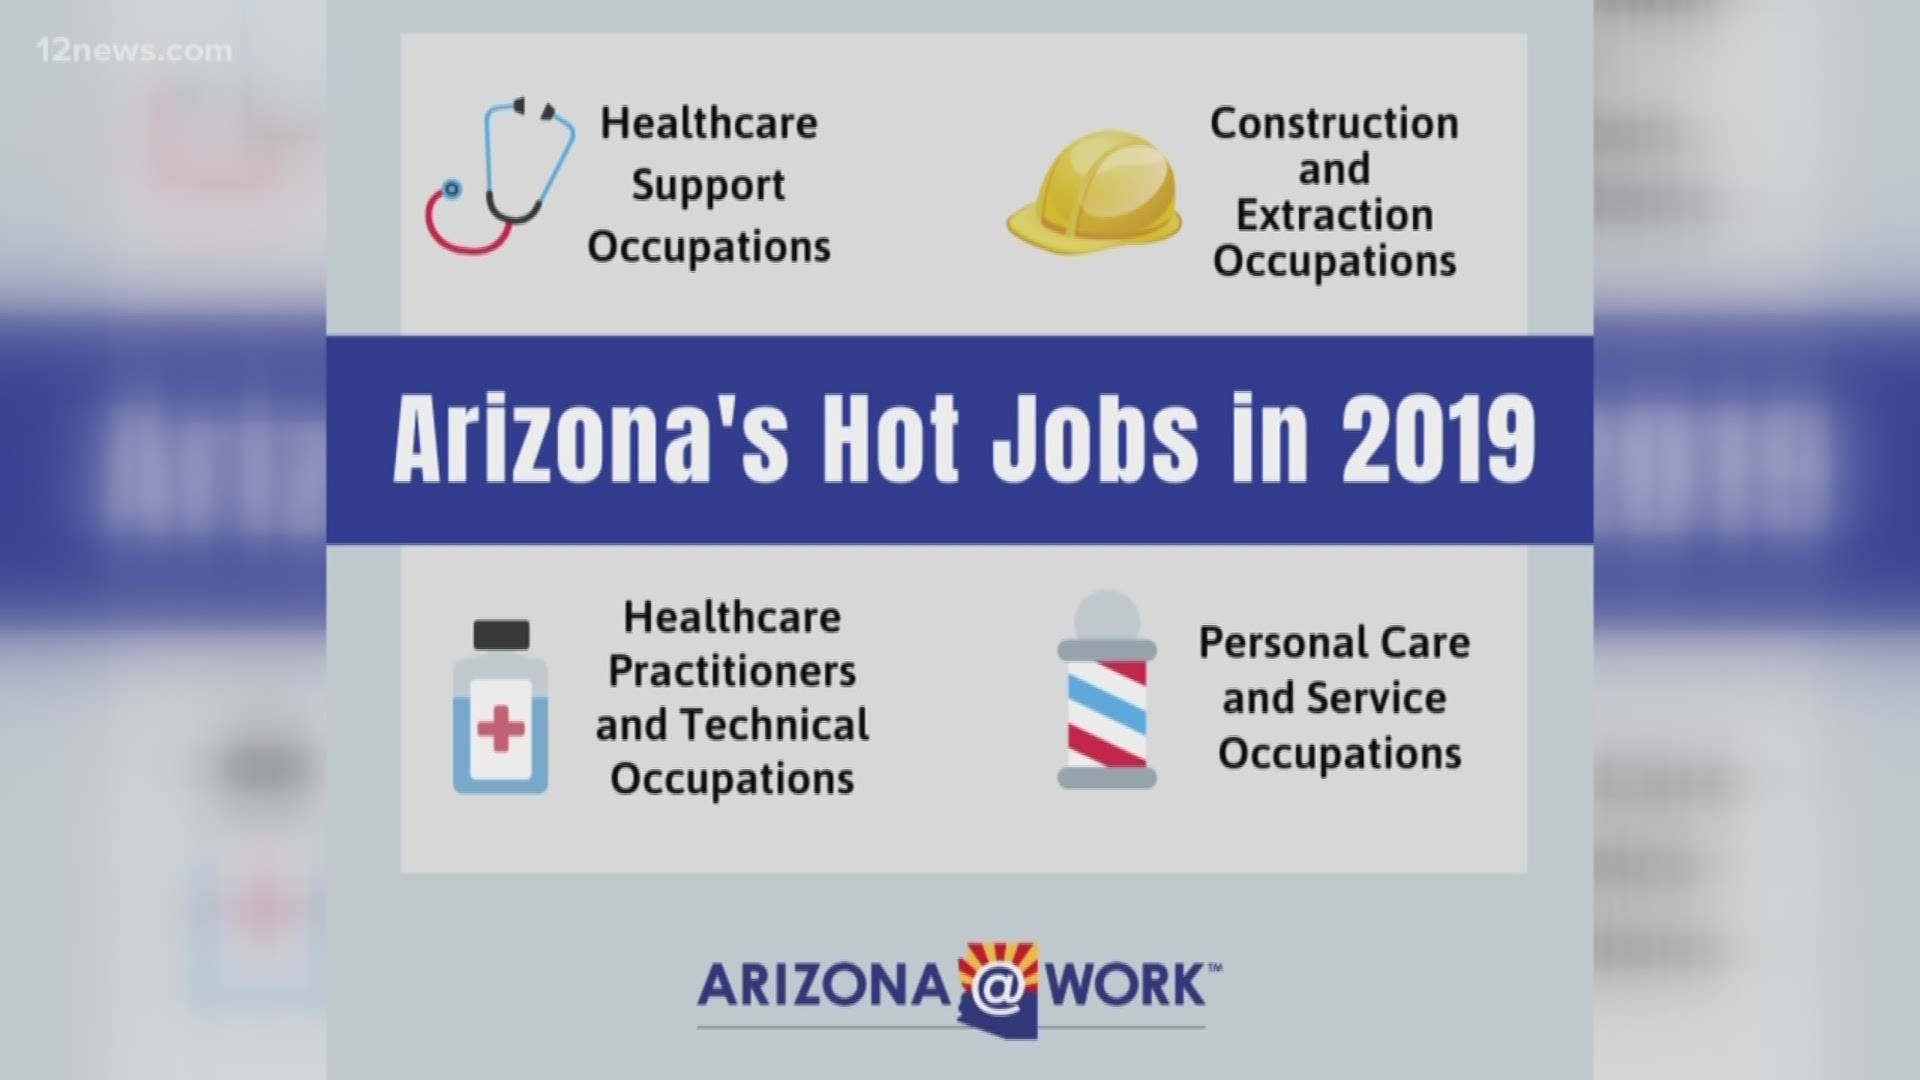 Arizona's hot jobs for 2019 and score free tickets to the Waste Management Phoenix Open Jan. 28-29 for first responders and U.S. military, along with free tickets for Vitalant blood donors.